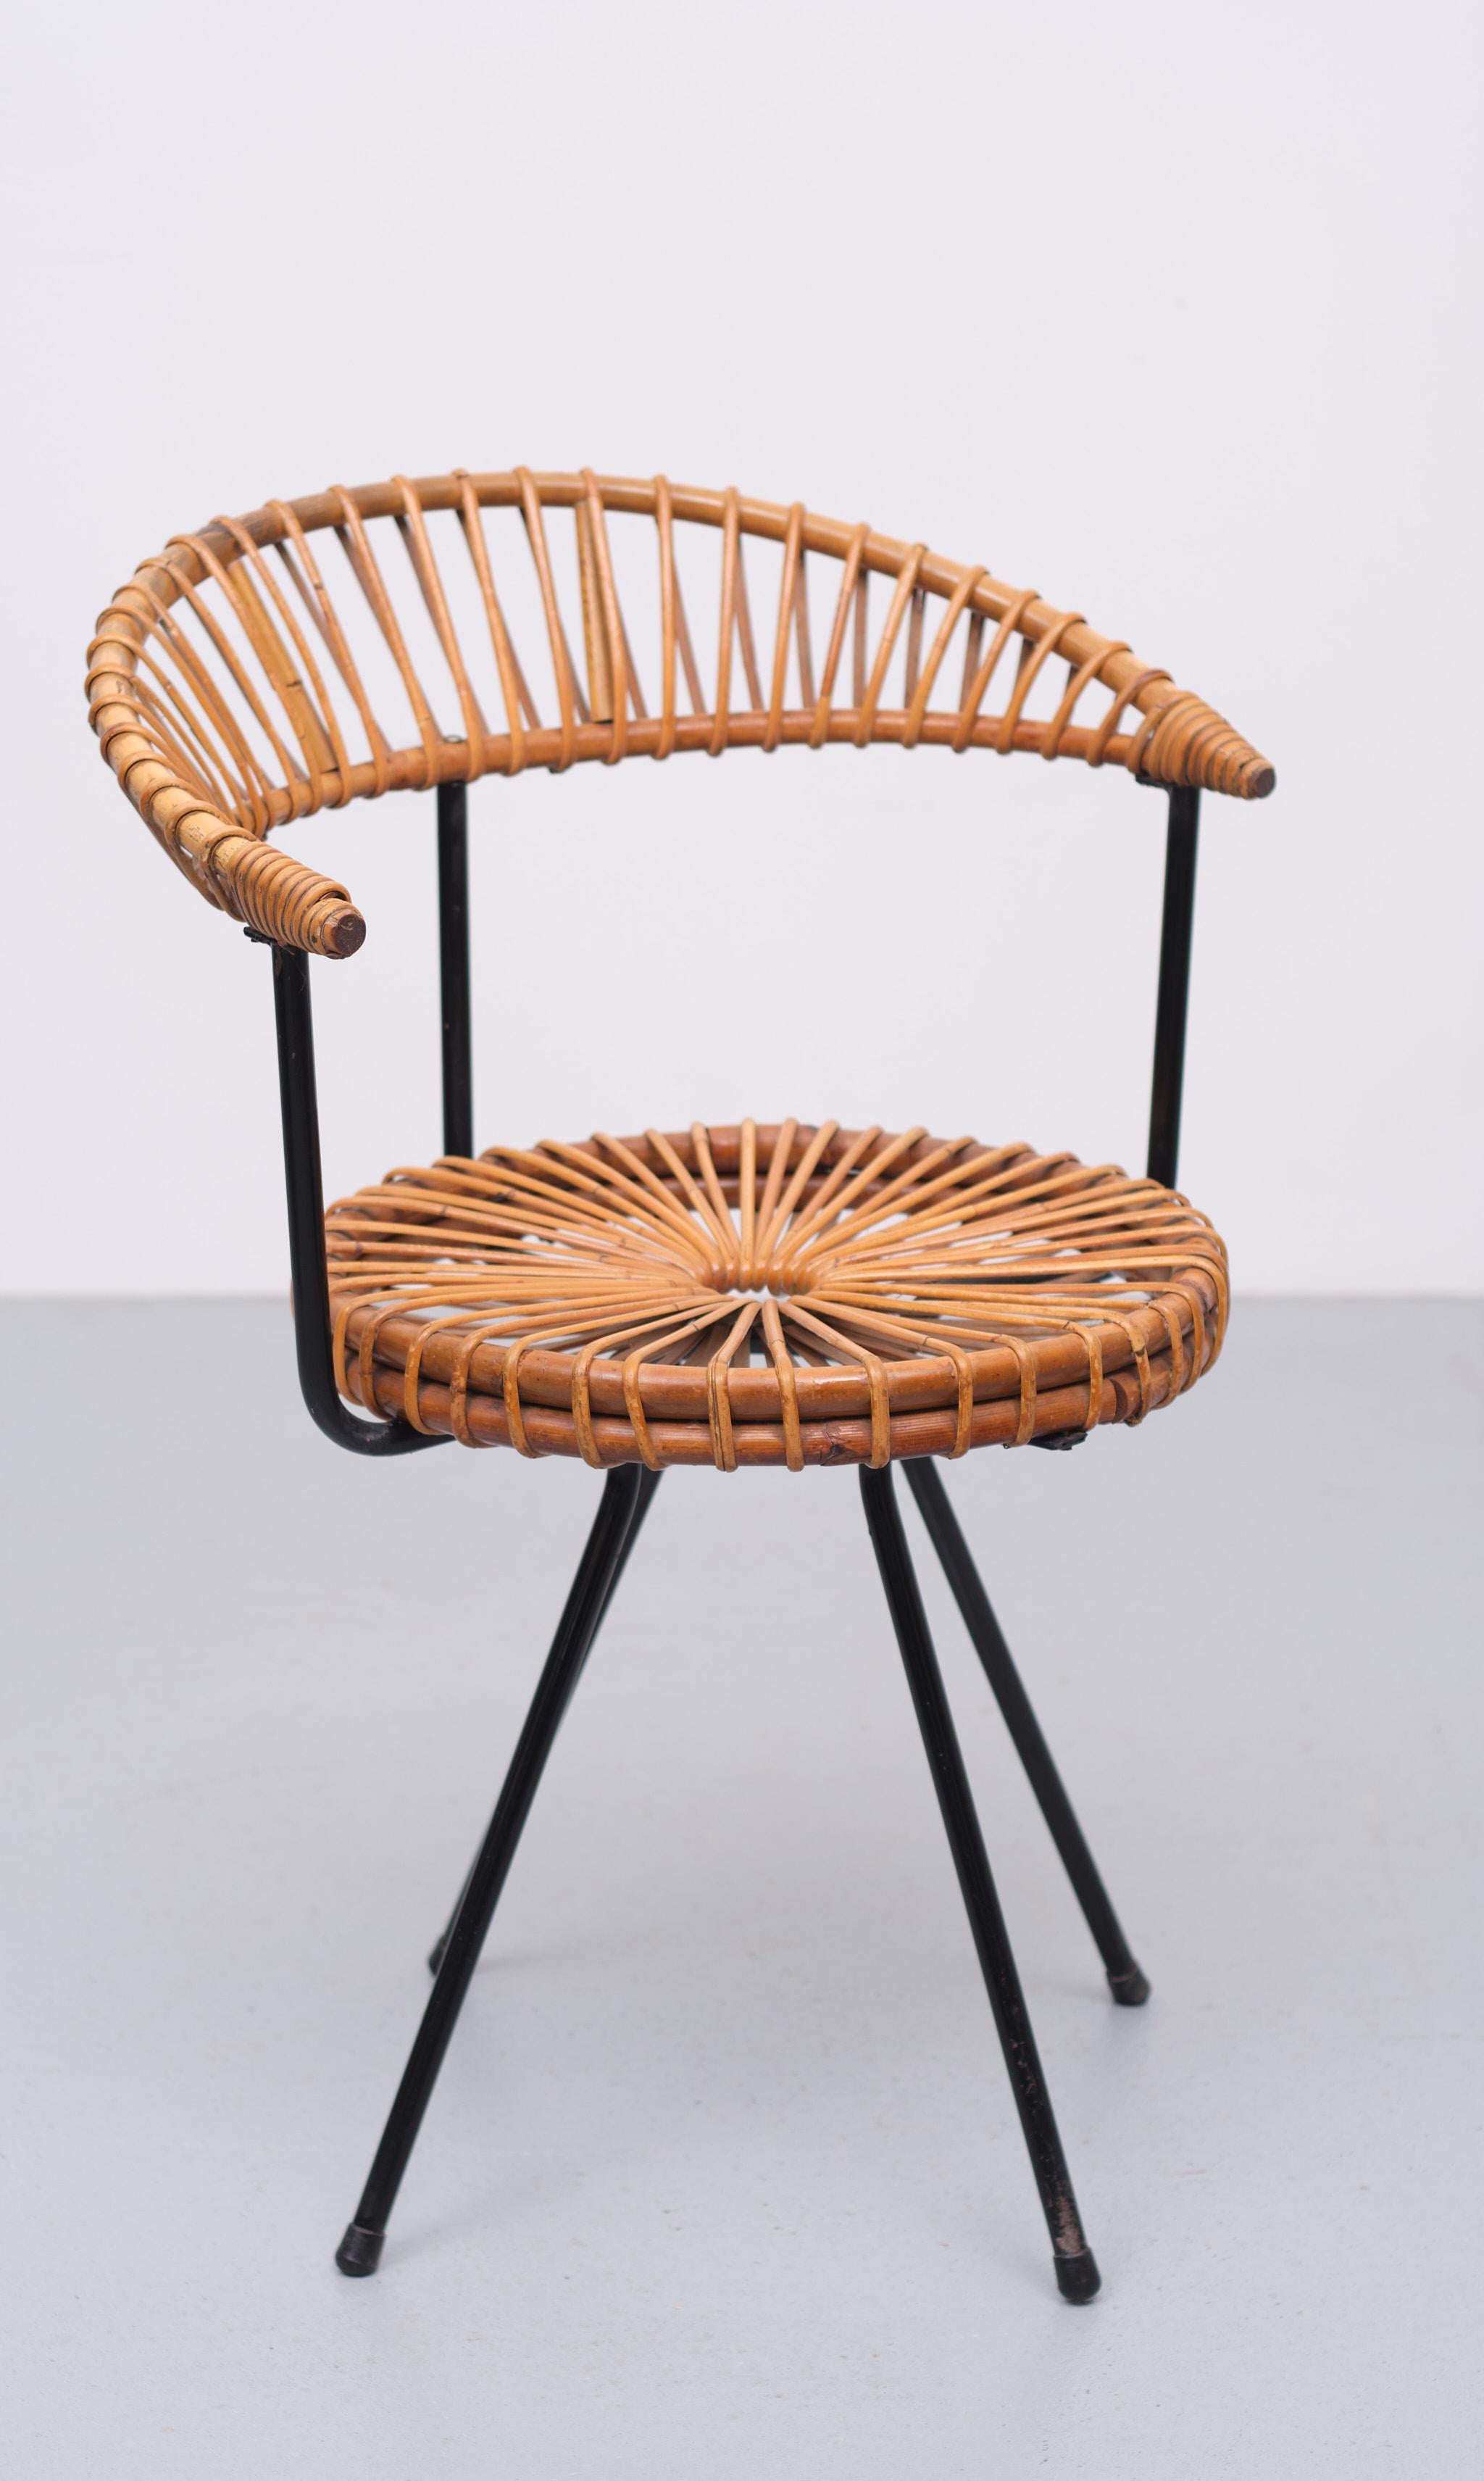 Lovely wicker chair. 1950s Dutch Design Dirk van Sliedregt for Rohe Noordwolde 
There are some strokes Wicker that are repaired. See photos.